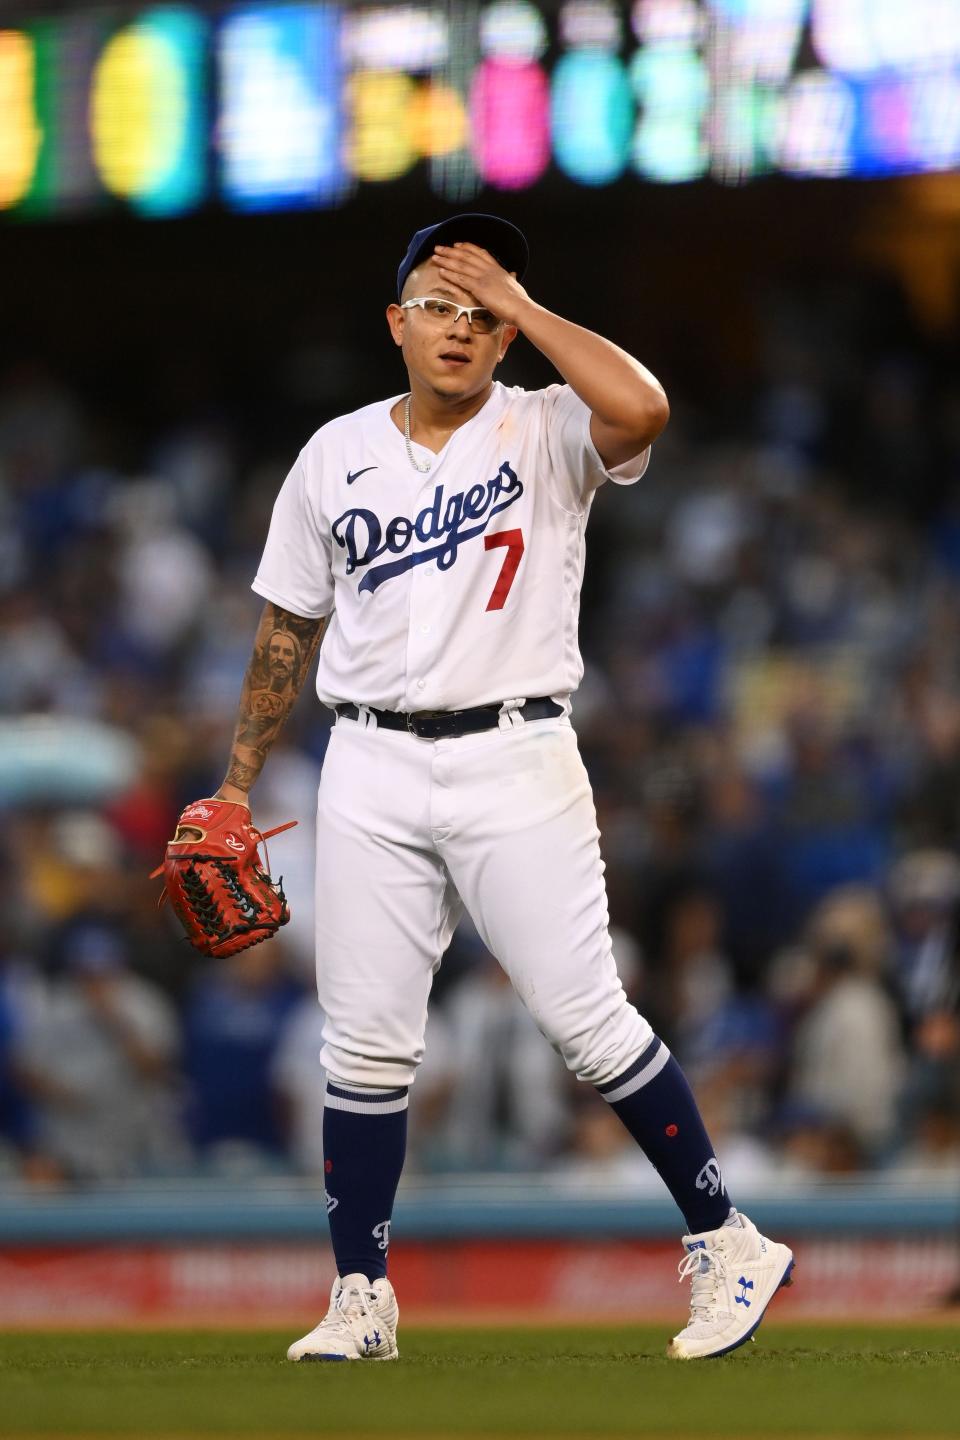 Los Angeles Dodgers starter Julio Urias gave up five earned runs in Wednesday's Game 4 loss to the Atlanta Braves.